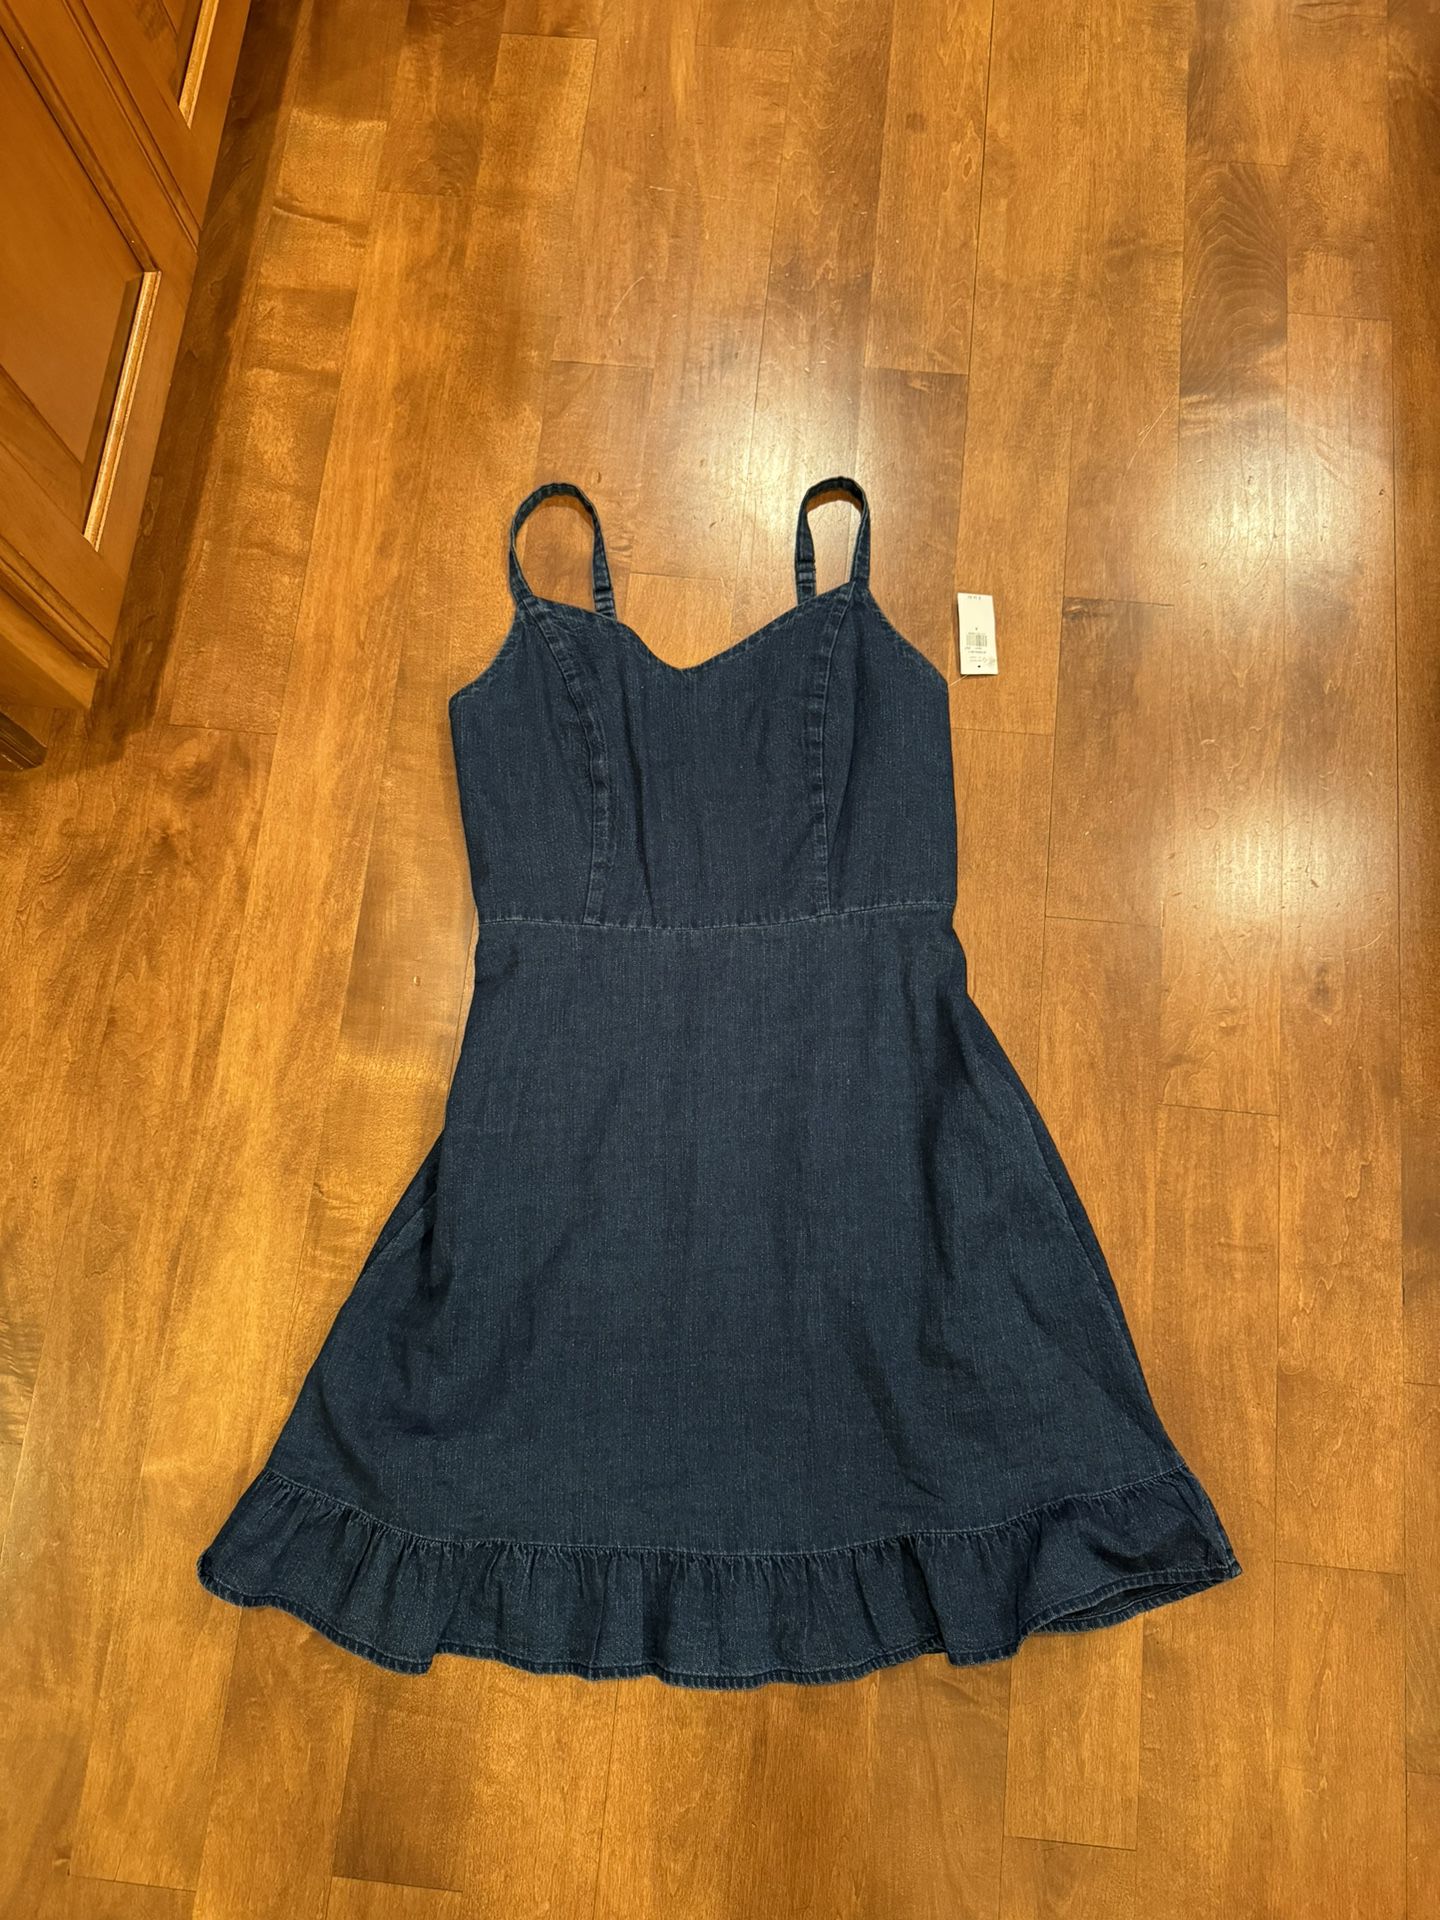 Brand New With Tags Women’s Old Navy Denim Dress Shipping Available